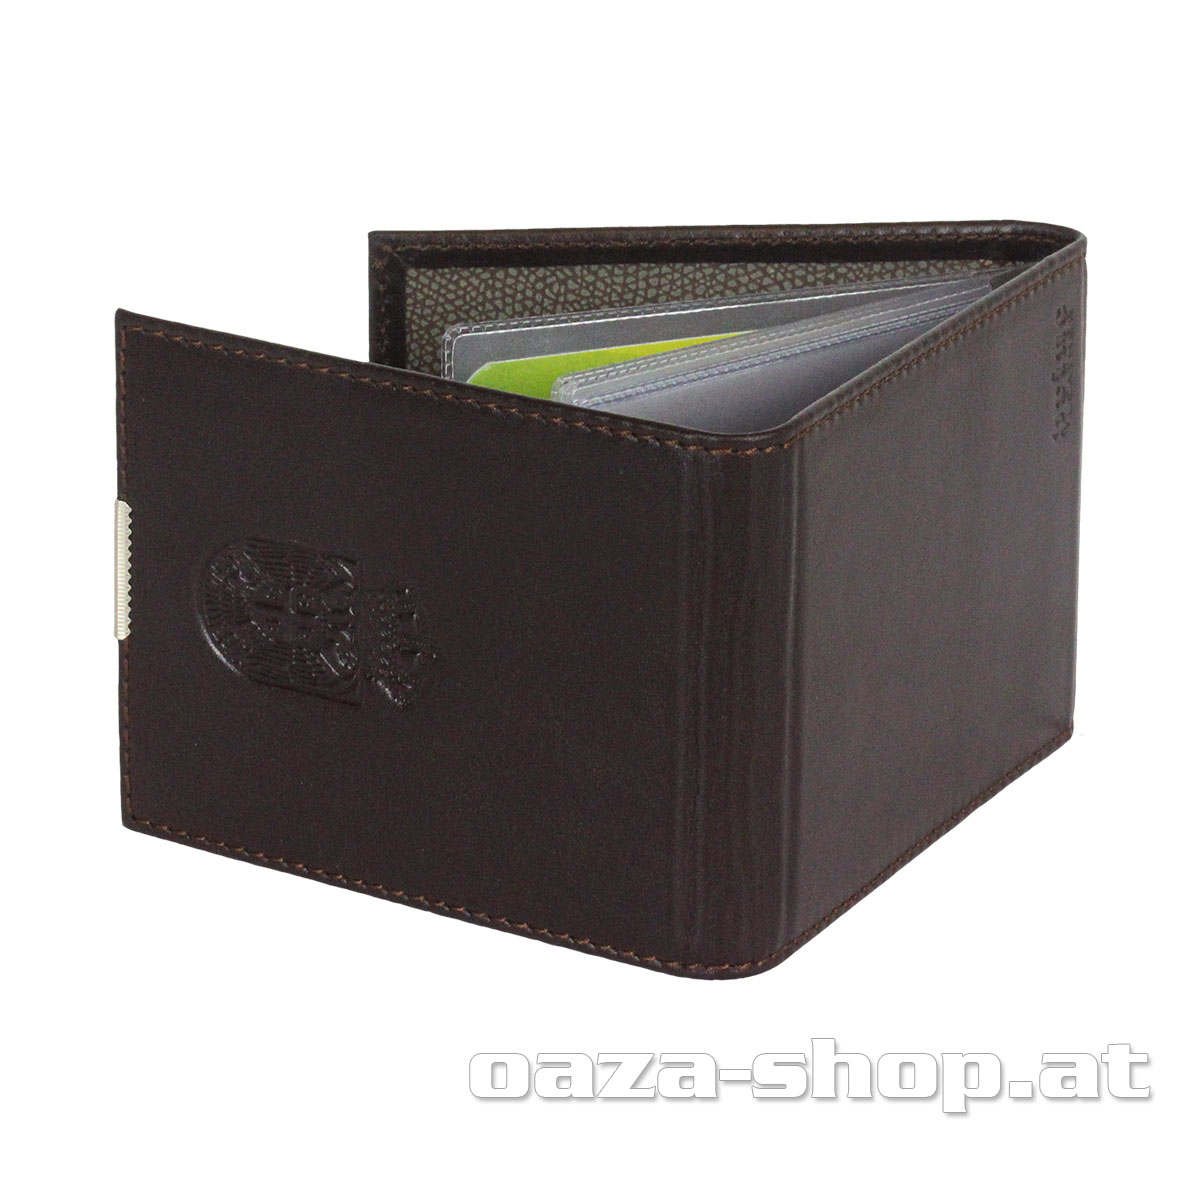 Woodland Black Leather Solid Two Fold Wallet 8775475.htm - Buy Woodland  Black Leather Solid Two Fold Wallet 8775475.htm online in India